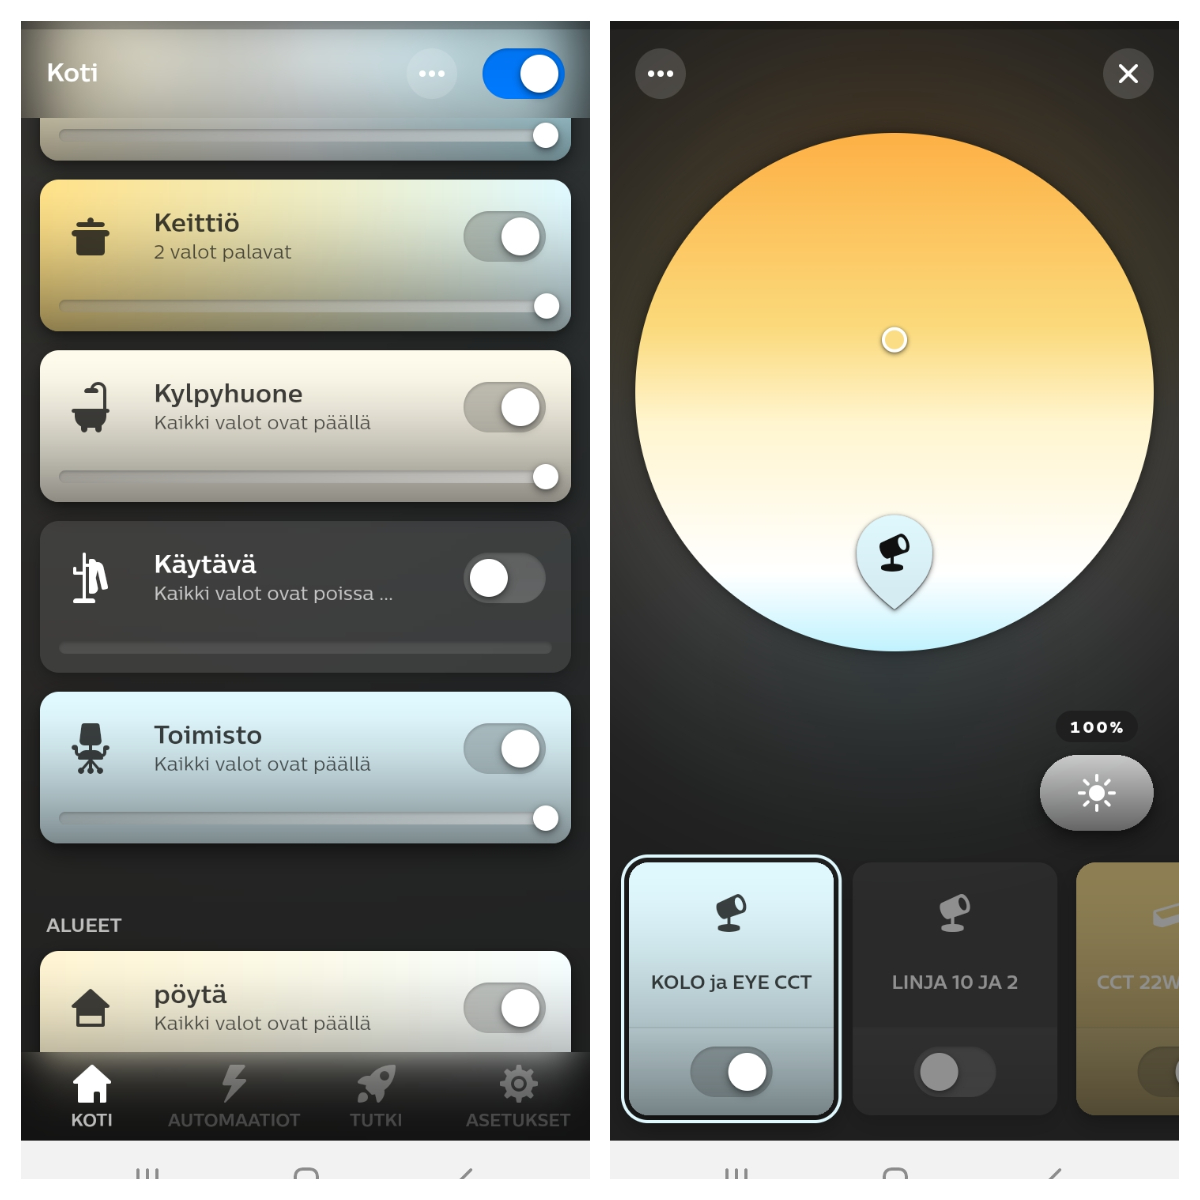 An example of the Philips Hue mobile view. On the left, the different rooms in the home and on the right, the kitchen light control mode. The colour wheel adjusts the colour temperature of the white light from warm white to cool white and the right edge adjusts the brightness. Of course, automation is also possible.